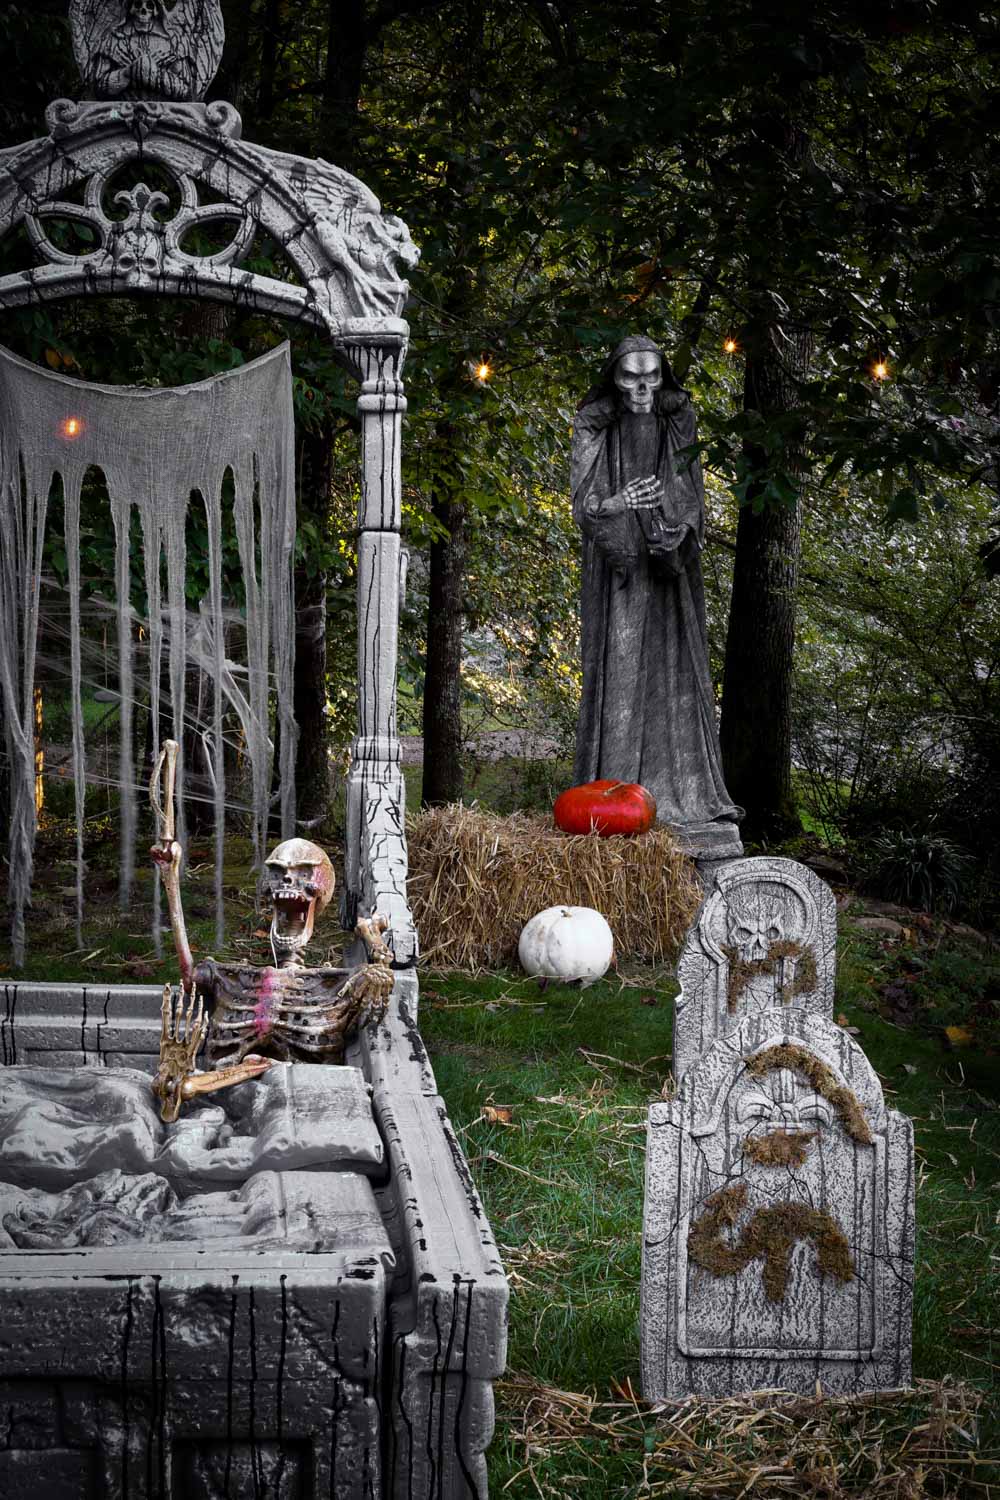 Transform Your Front Yard Into a Haunted Graveyard for Halloween ...